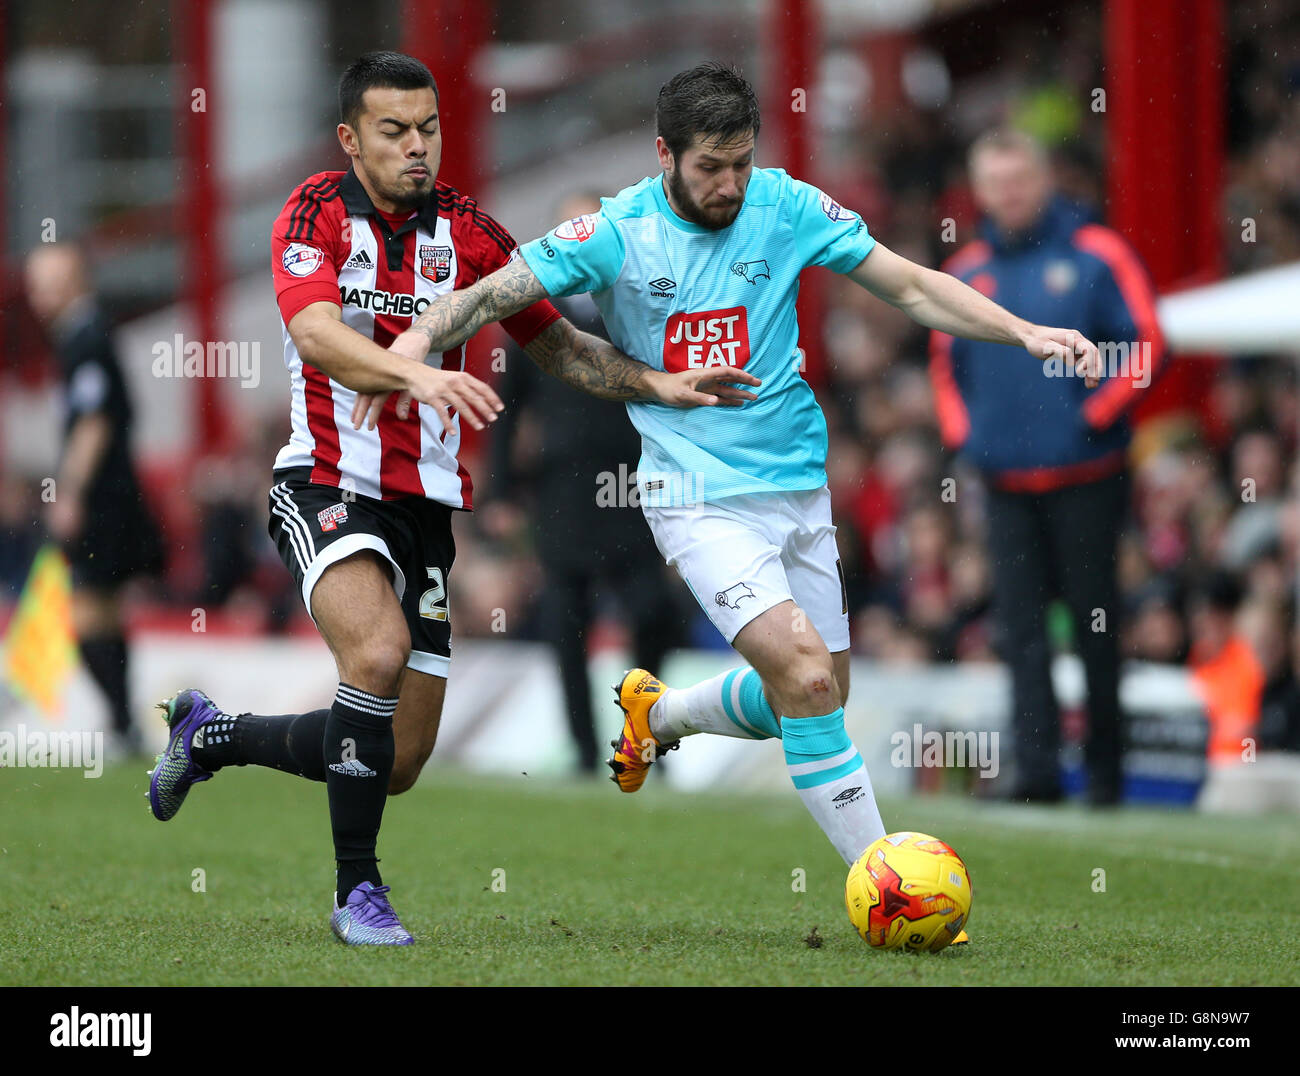 Brentford v Derby County - Sky Bet Championship - Griffin Park. Brentford's Nico Yennaris (left) and Derby County's Jacob Butterfield battle for the ball Stock Photo